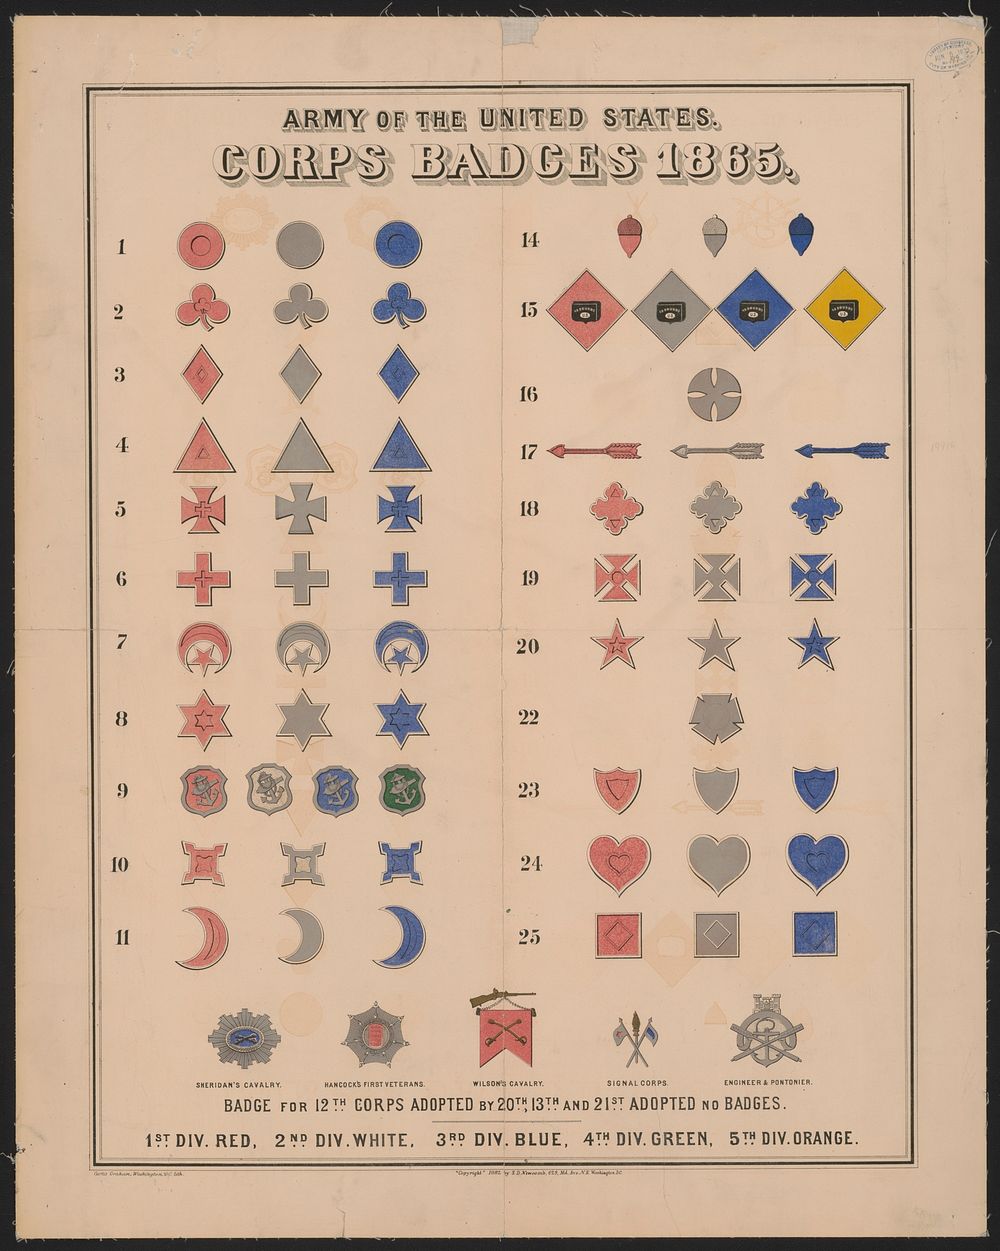 Army of the United States. Corps badges, 1865